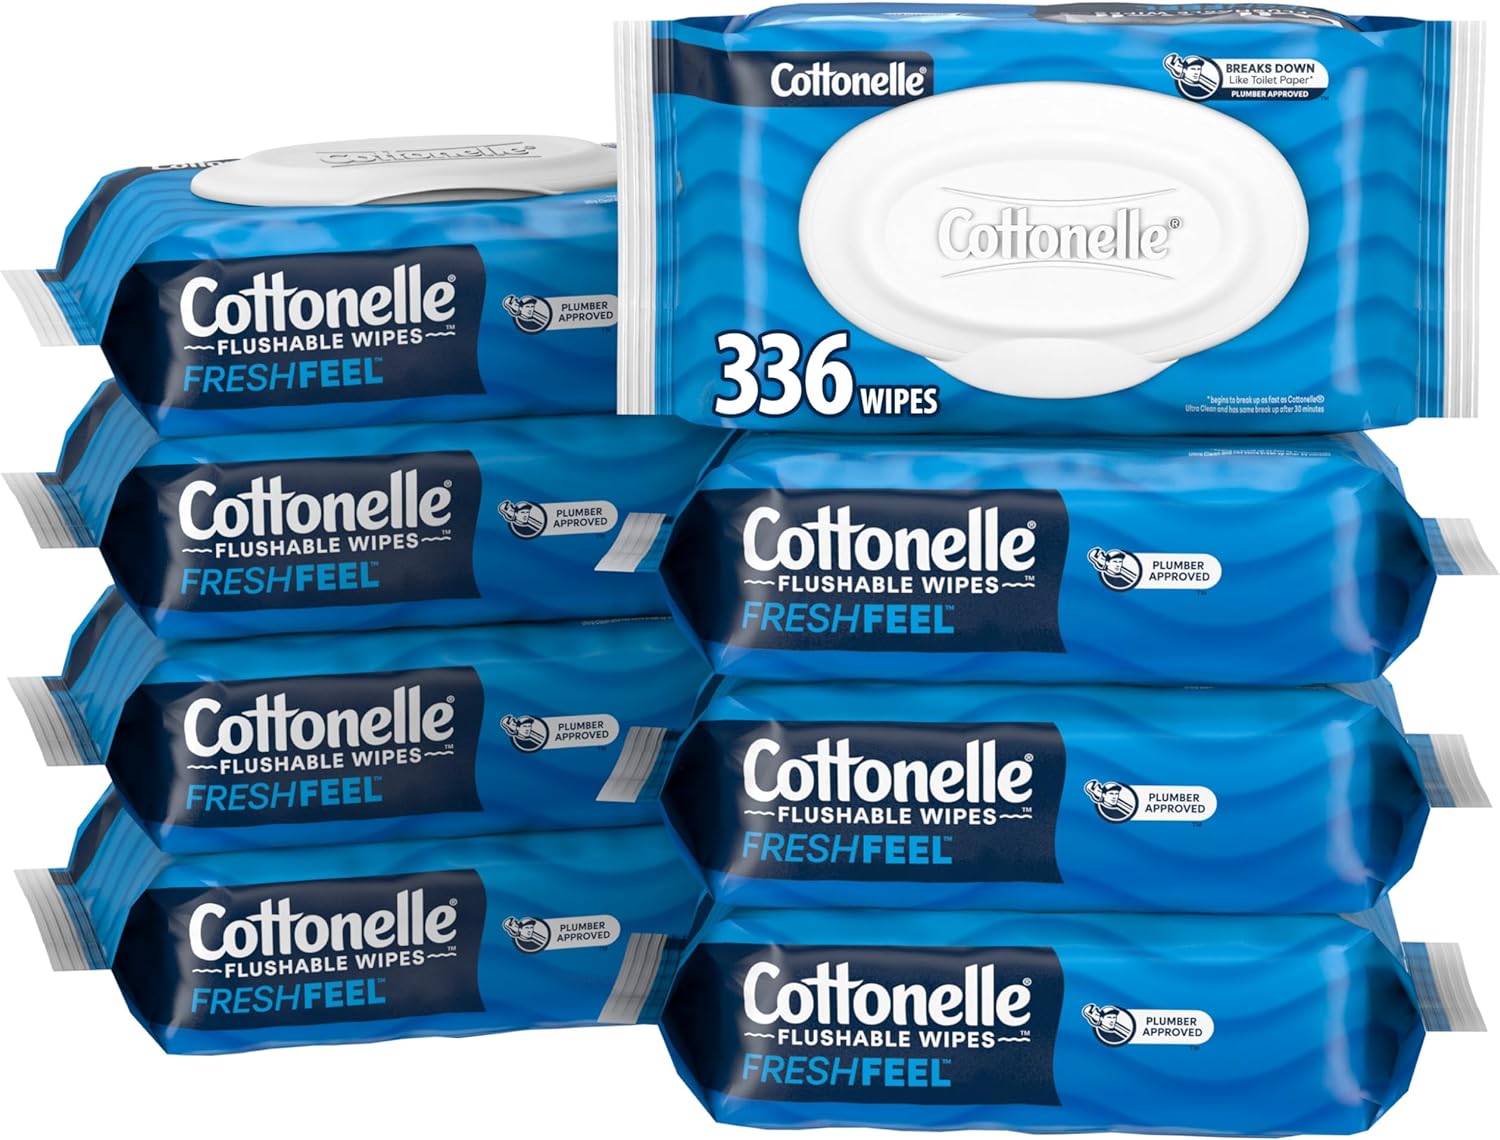 [S&S] $11.63: 8-Pk 42-Ct Cottonelle Freshfeel Flushable Adult Wet Wipes at Amazon